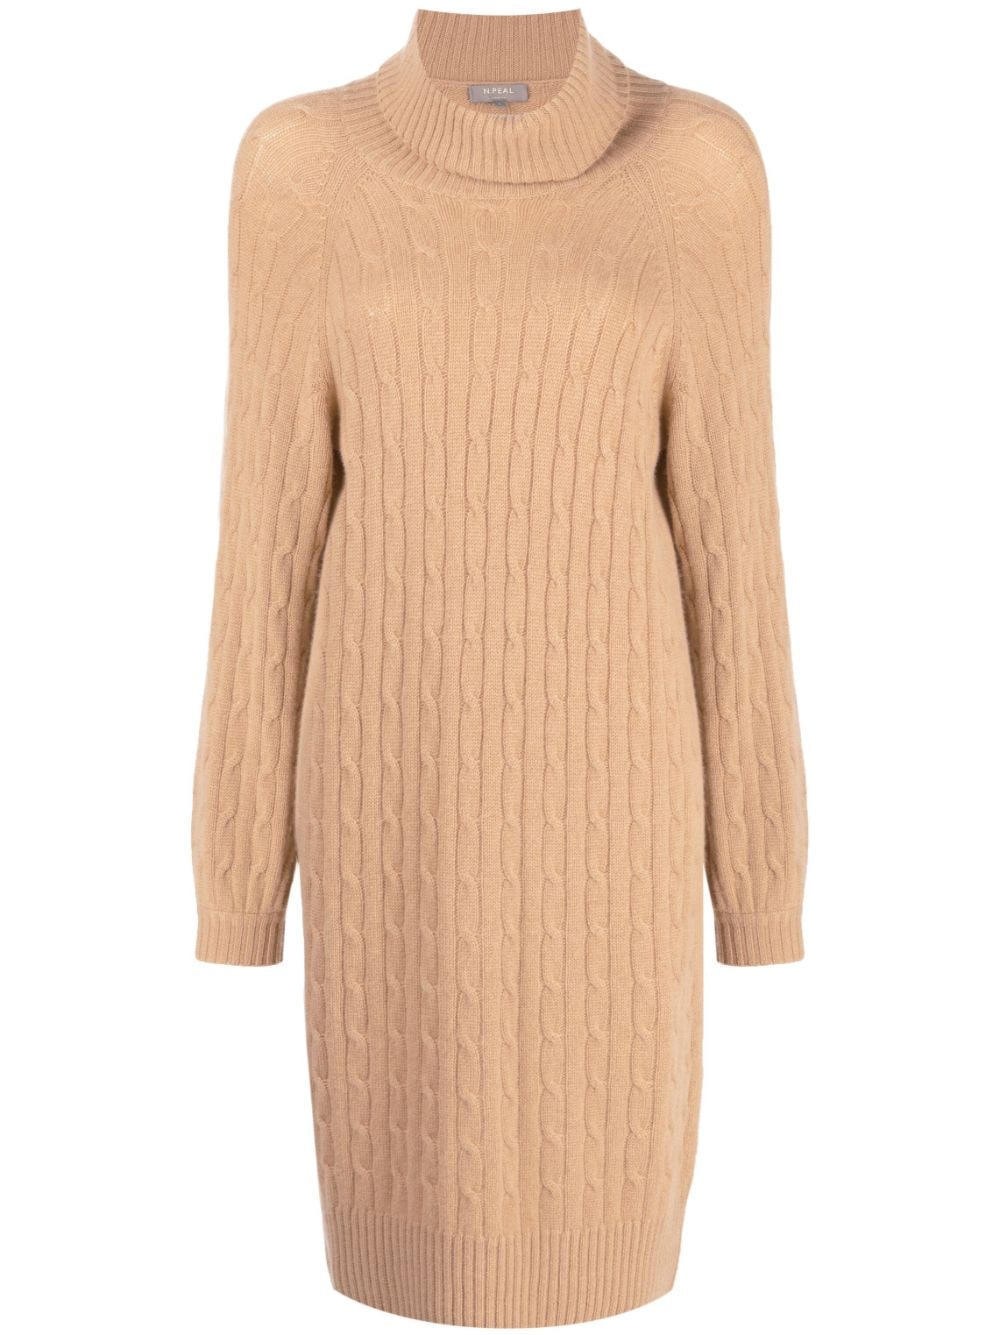 N.Peal cable-knit roll-neck dress - Neutrals von N.Peal